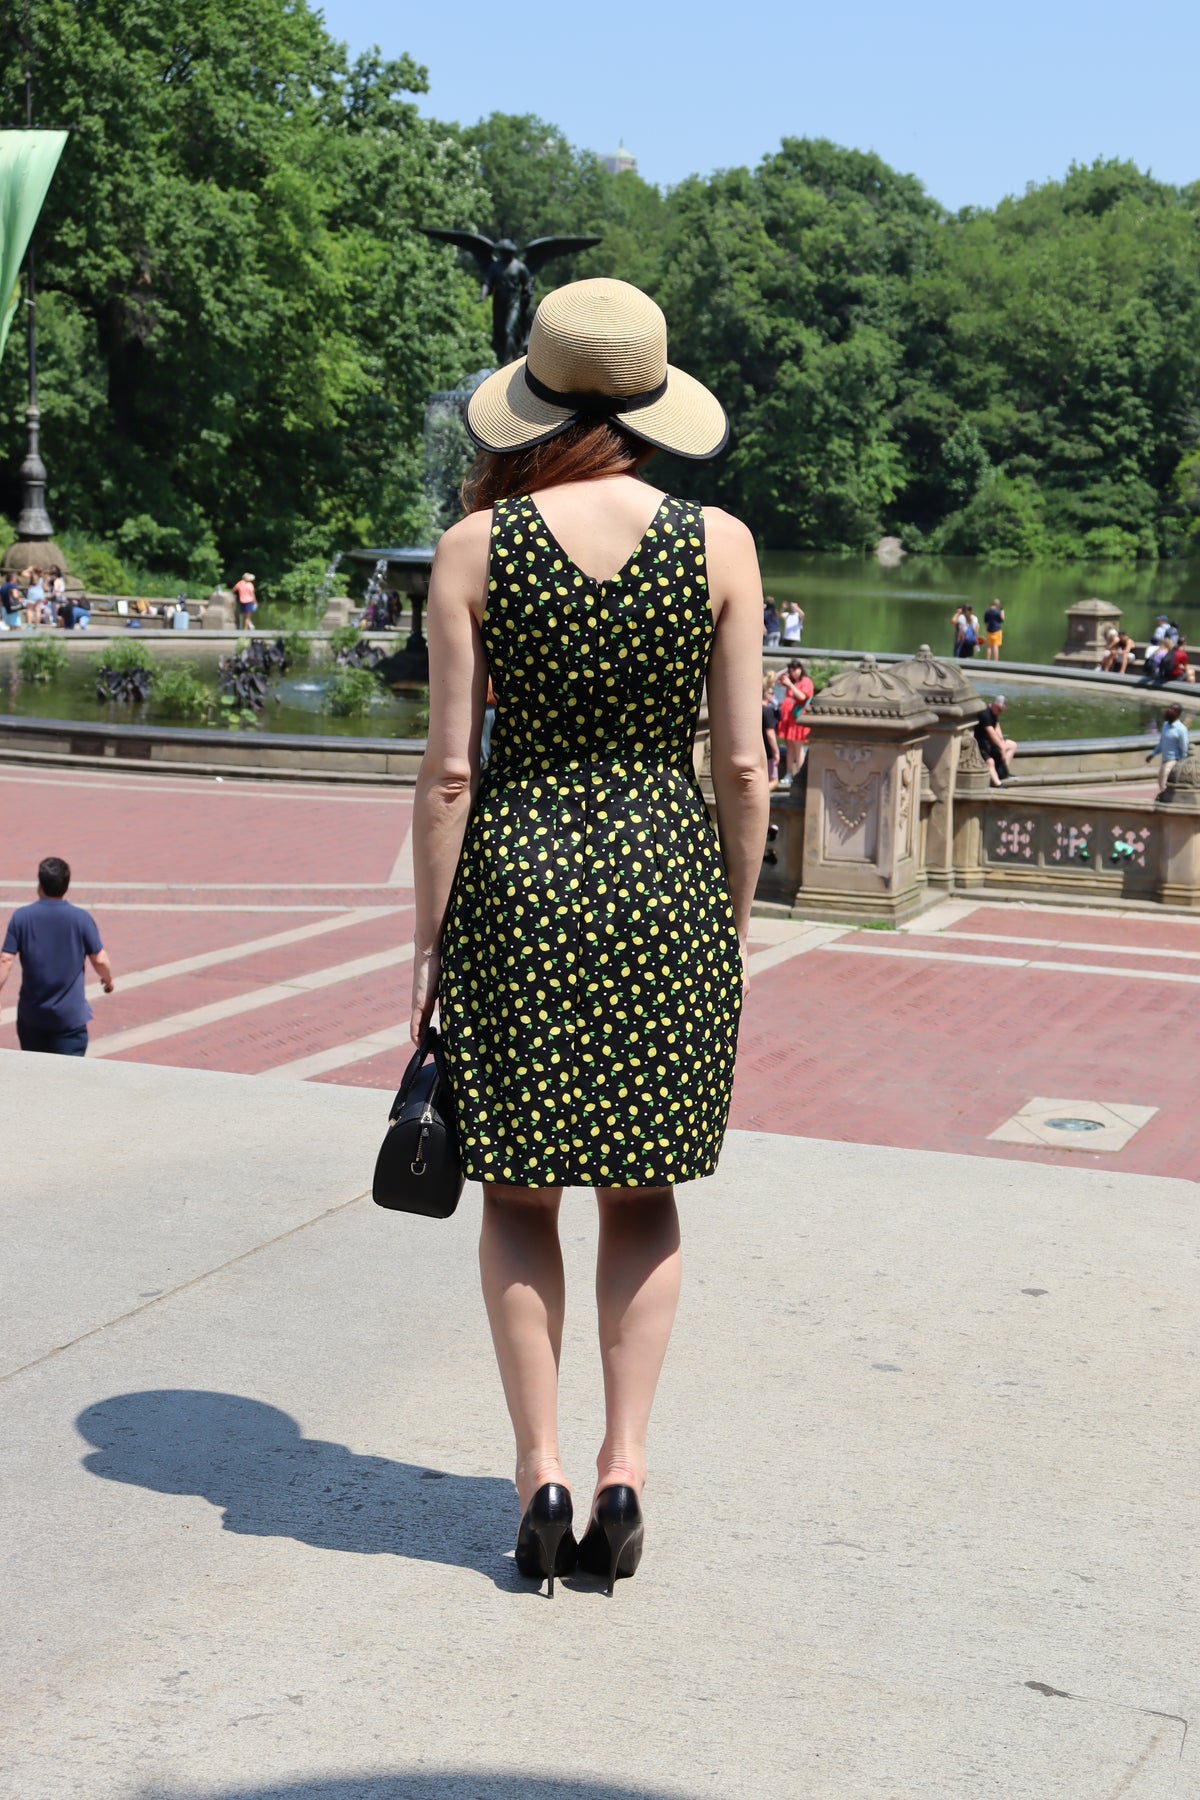 Back view of model in a black and yellow lemon print short dress wearing a sunhat with a black ribbon standing in Central Park before a fountain and a lake.balustrad.